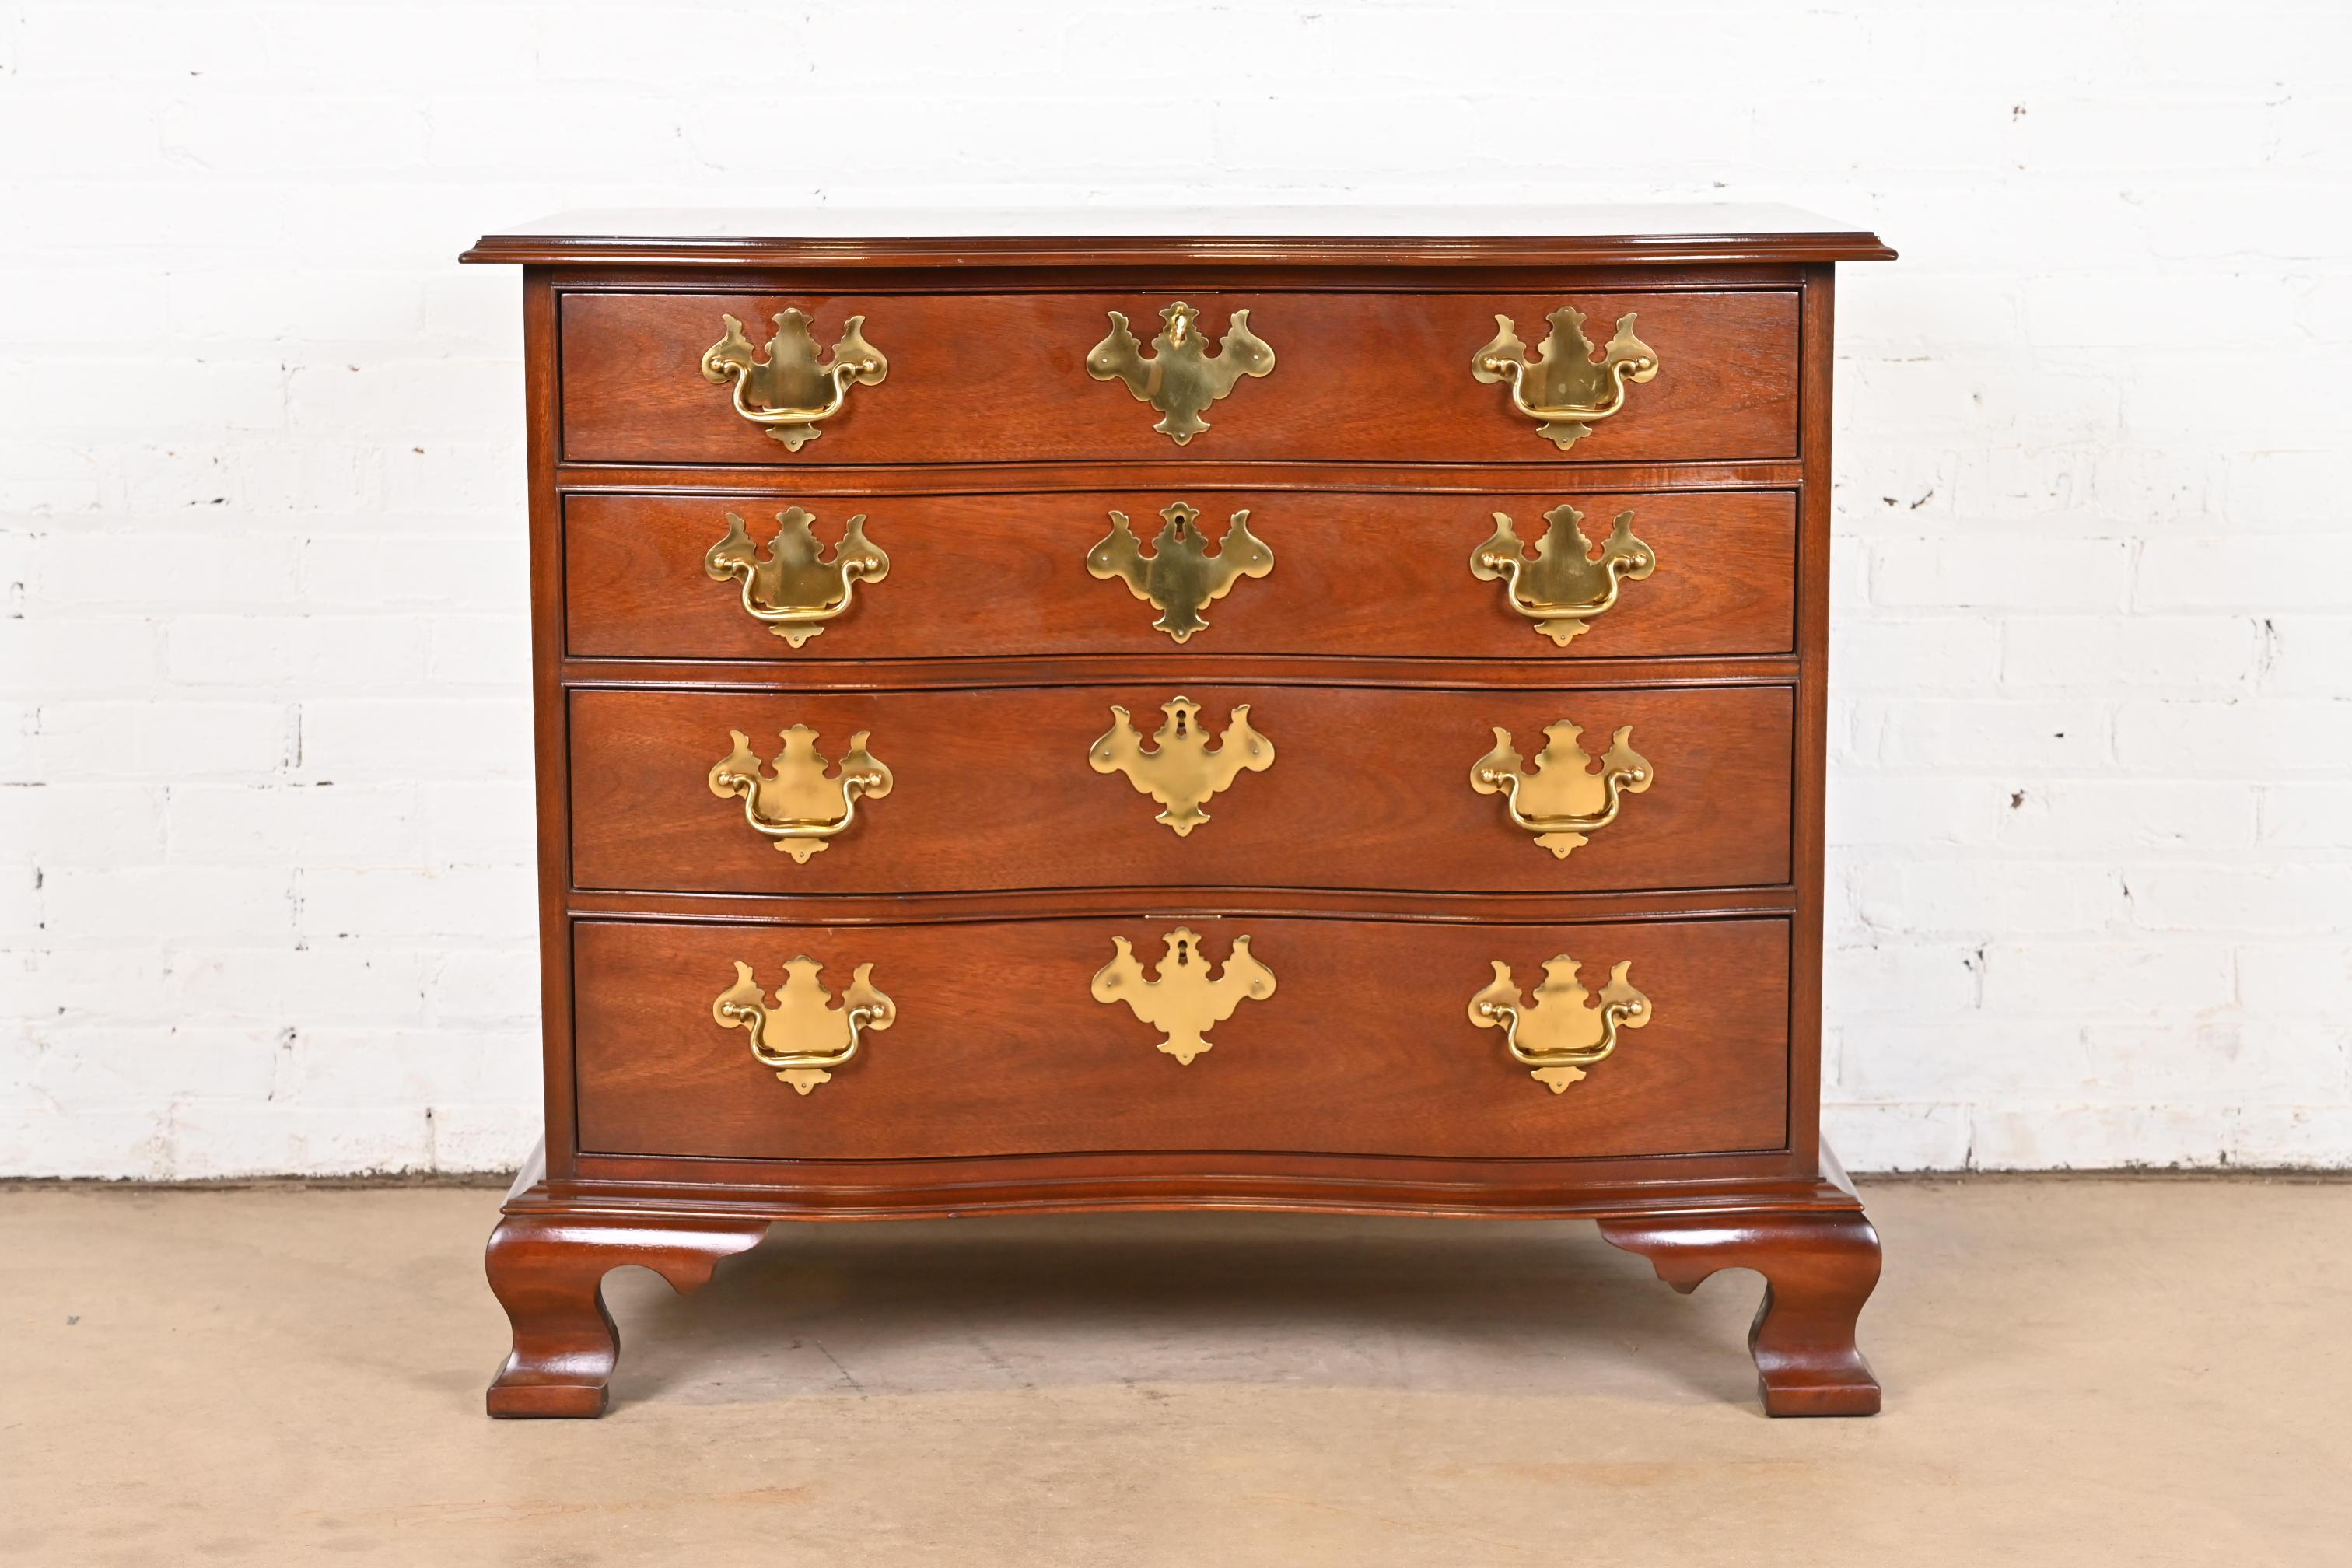 A gorgeous Georgian or Chippendale style serpentine front four-drawer dresser, commode, or chest of drawers

By Hickory Chair, 